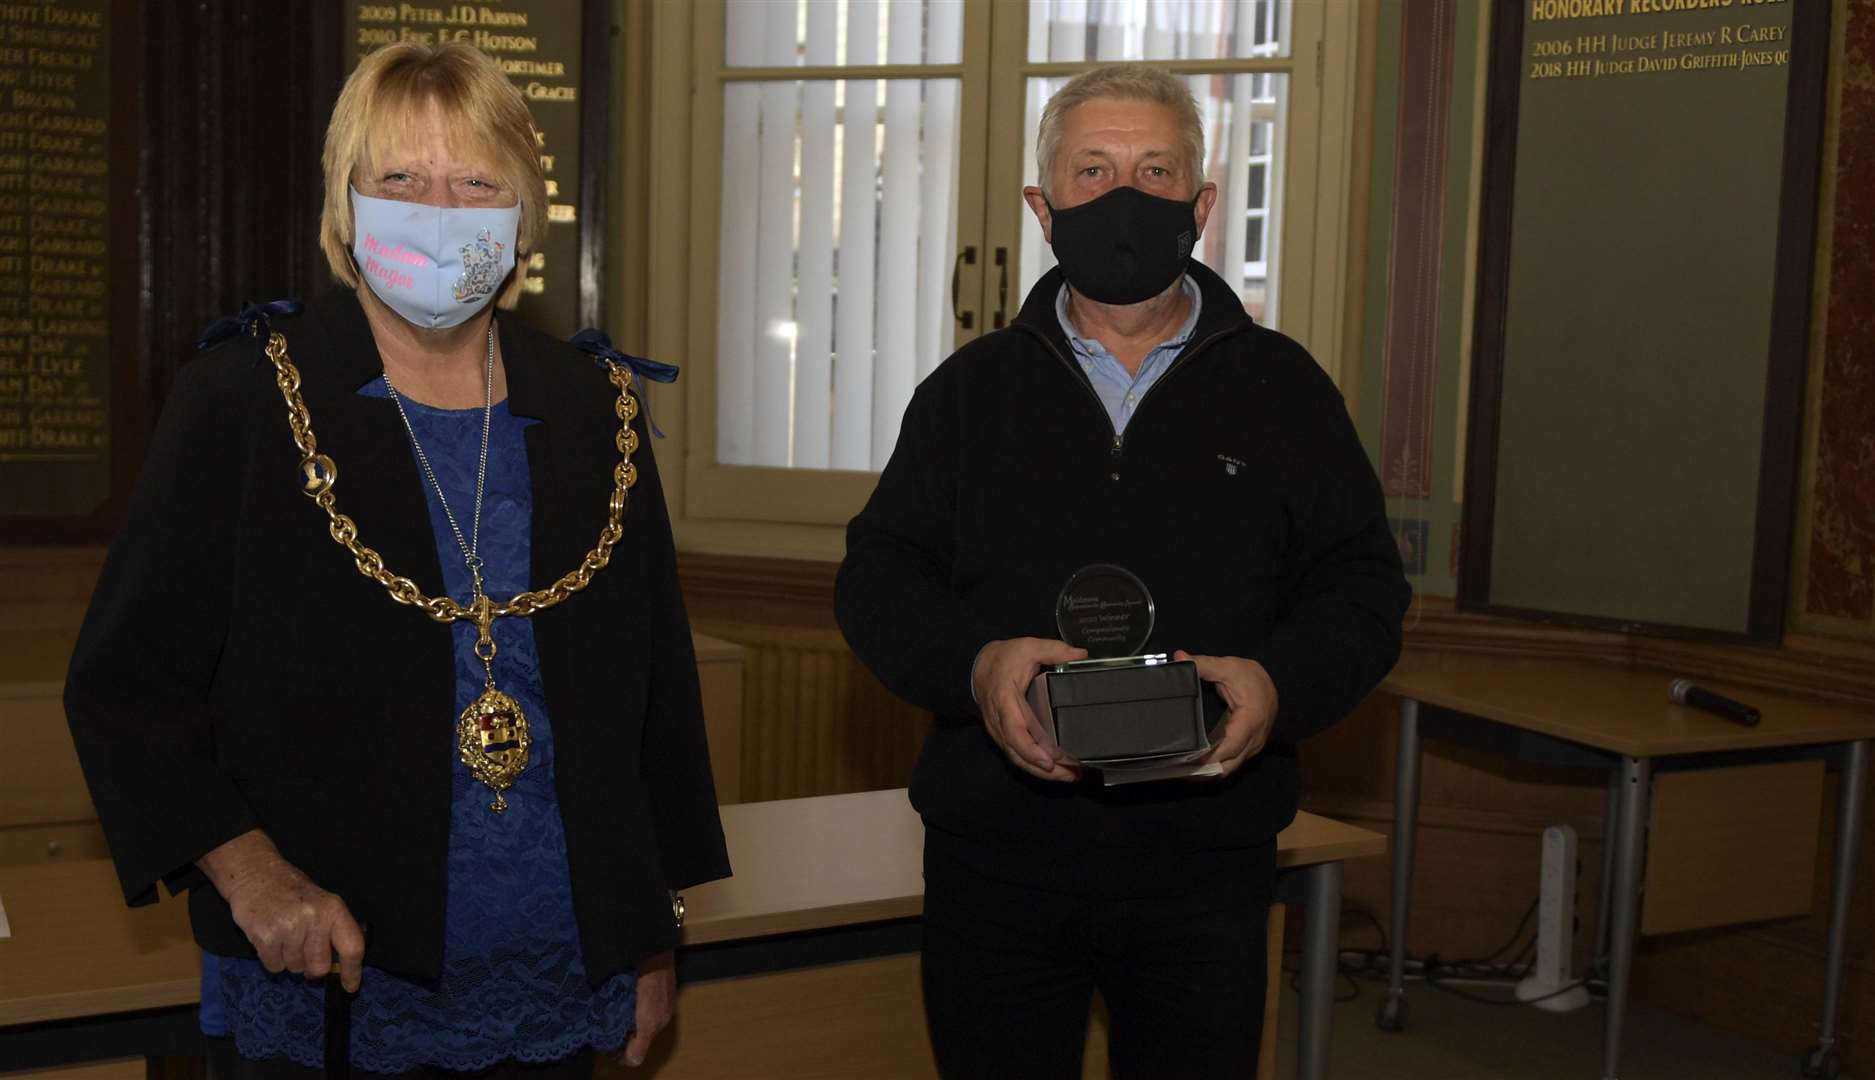 The Mayor of Maidstone Marion Ring presented Paul Mahoney with the community award on behalf of Yalding Community Volunteers. Picture: Barry Goodwin